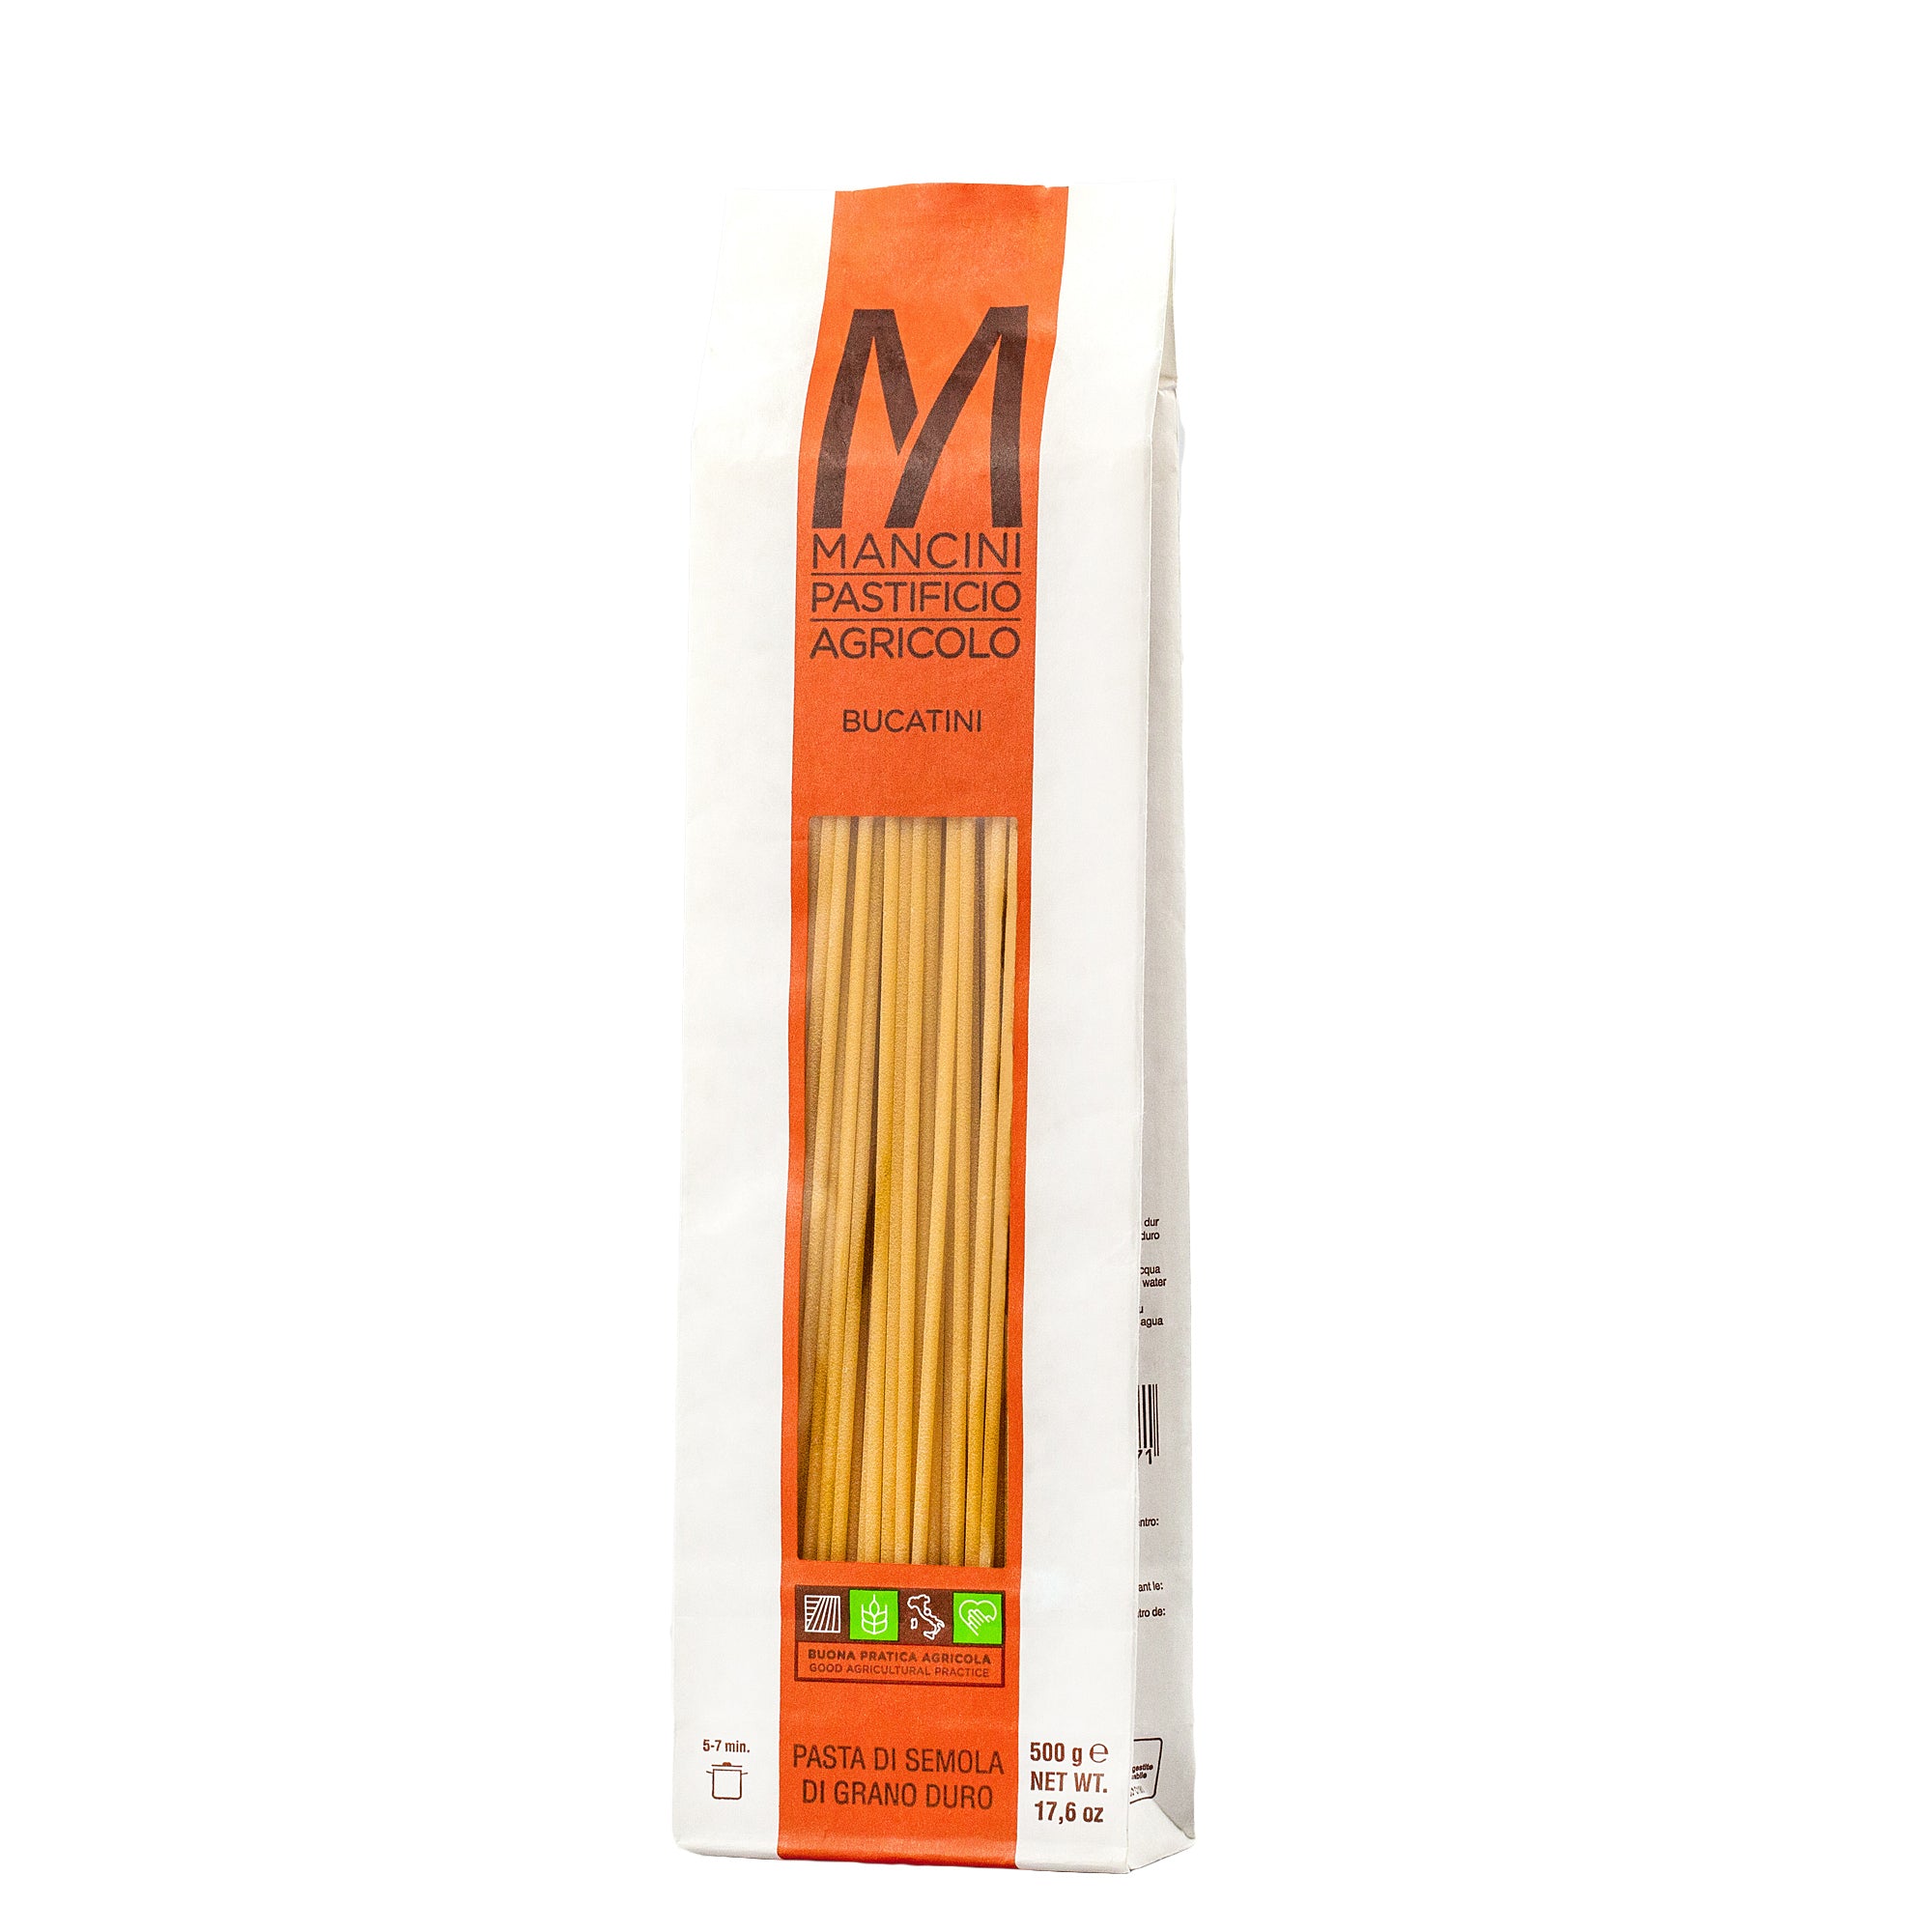 Pasta Mancini - Bucatini 500g – The Curated Pantry